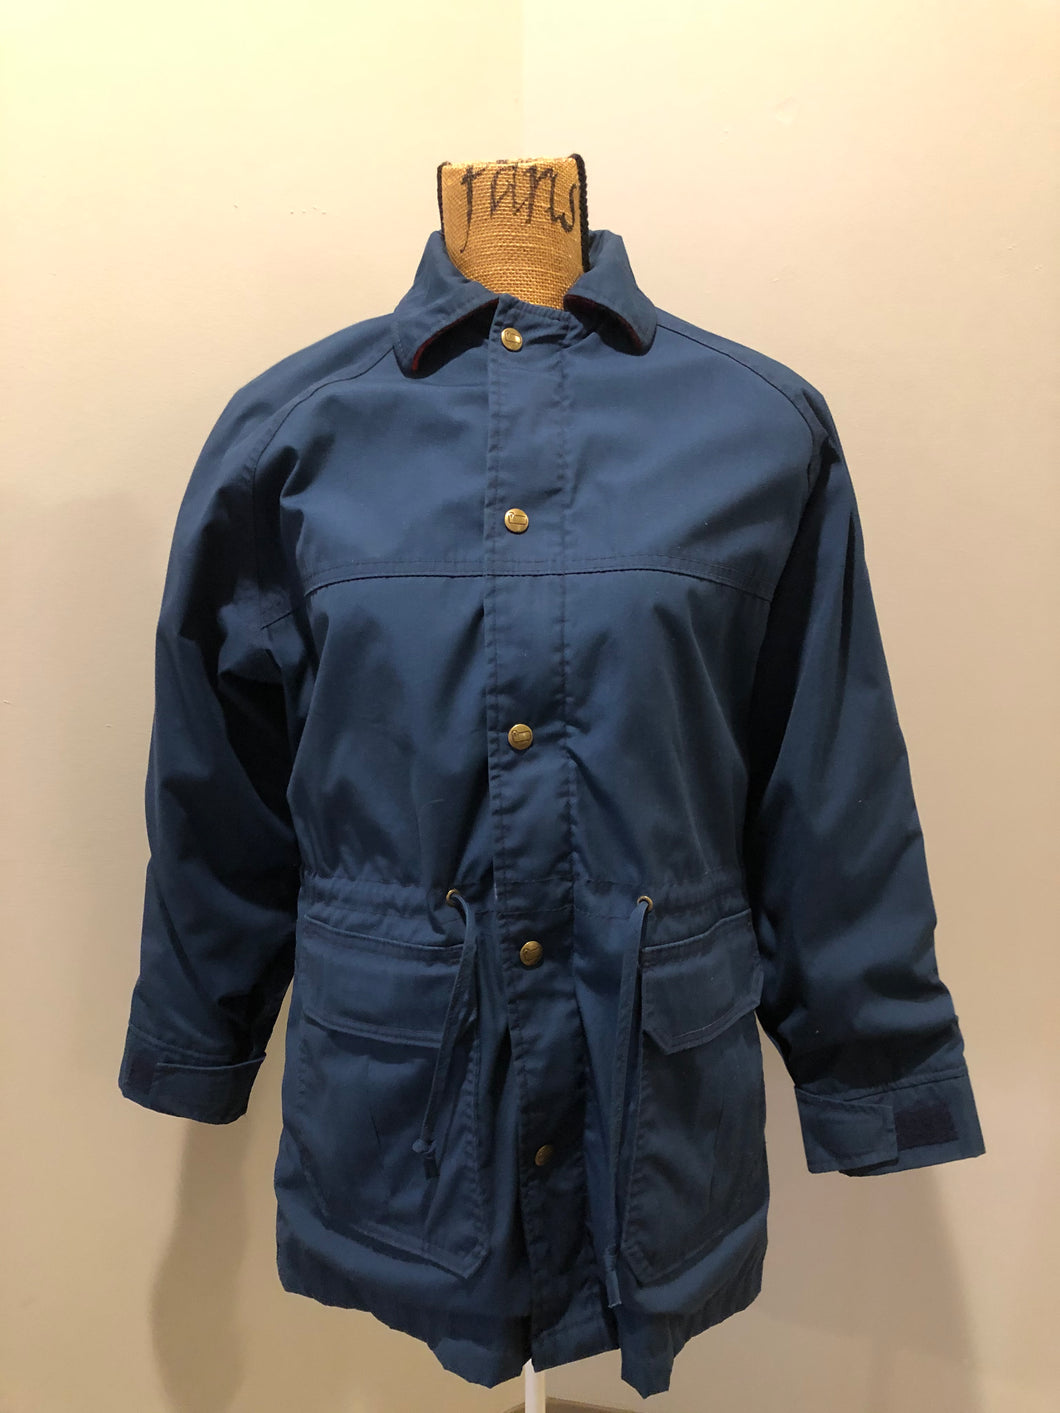 Kingspier Vintage - Woolrich Woman navy jacket with raglan sleeves, hood, zipper, snap closures with sheep logo, two flap pockets, drawstring at waist and red plaid wool lining. Made in the USA. Size medium. 